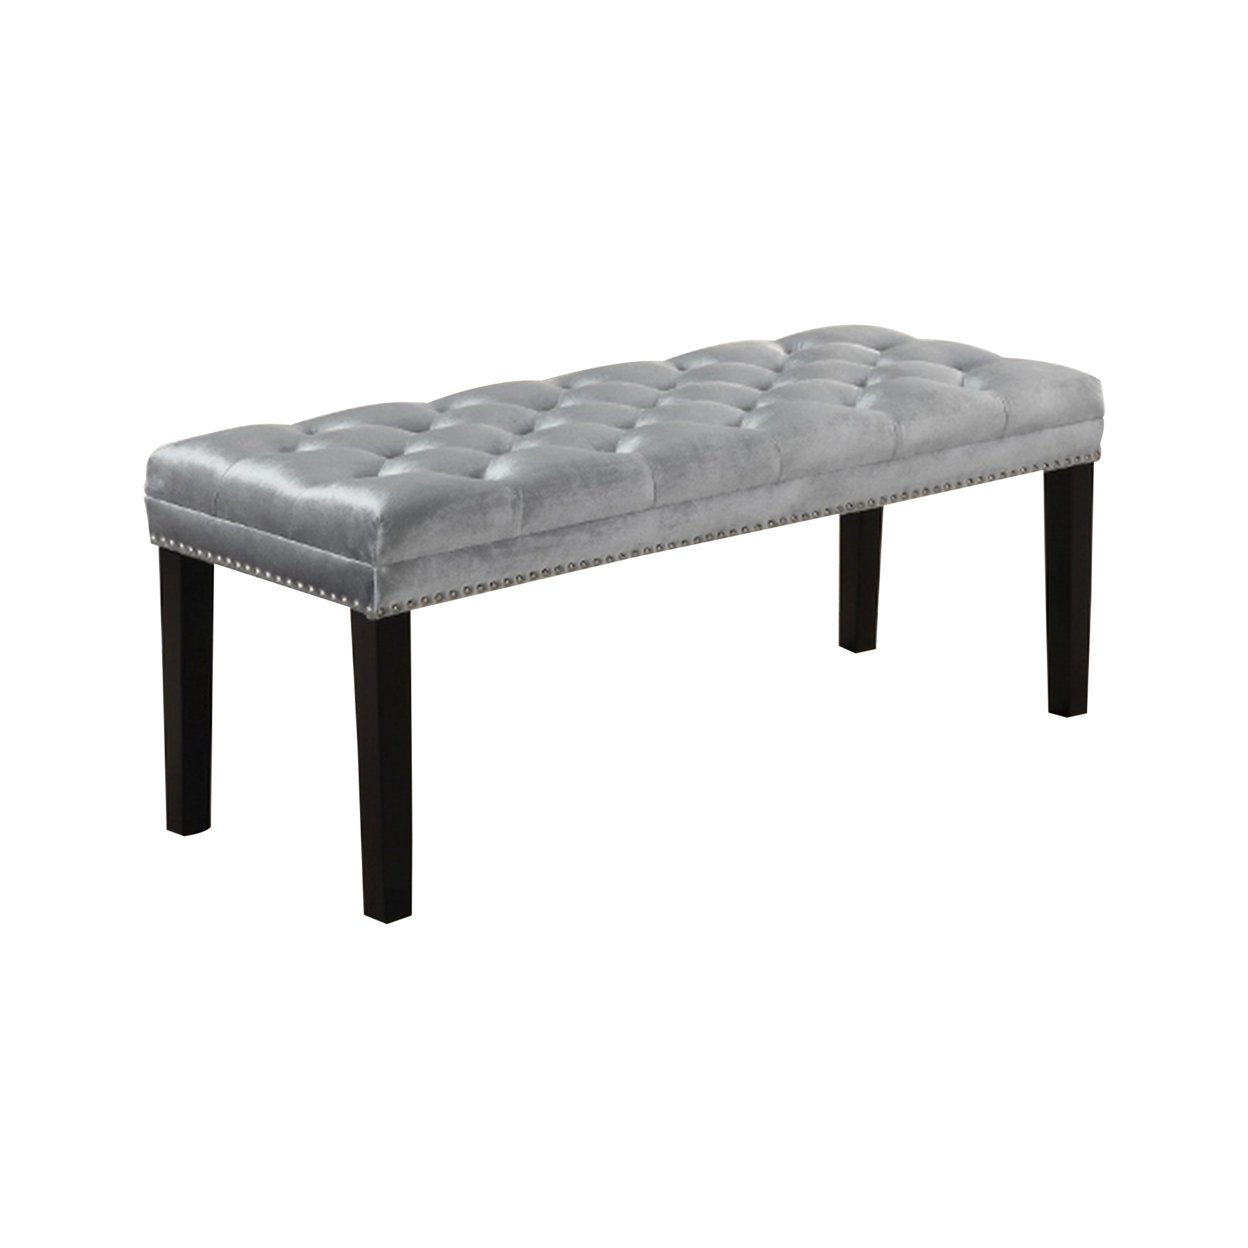 Bench With Nailhead Trims And Fabric Upholstered Seat,Silver- Saltoro Sherpi